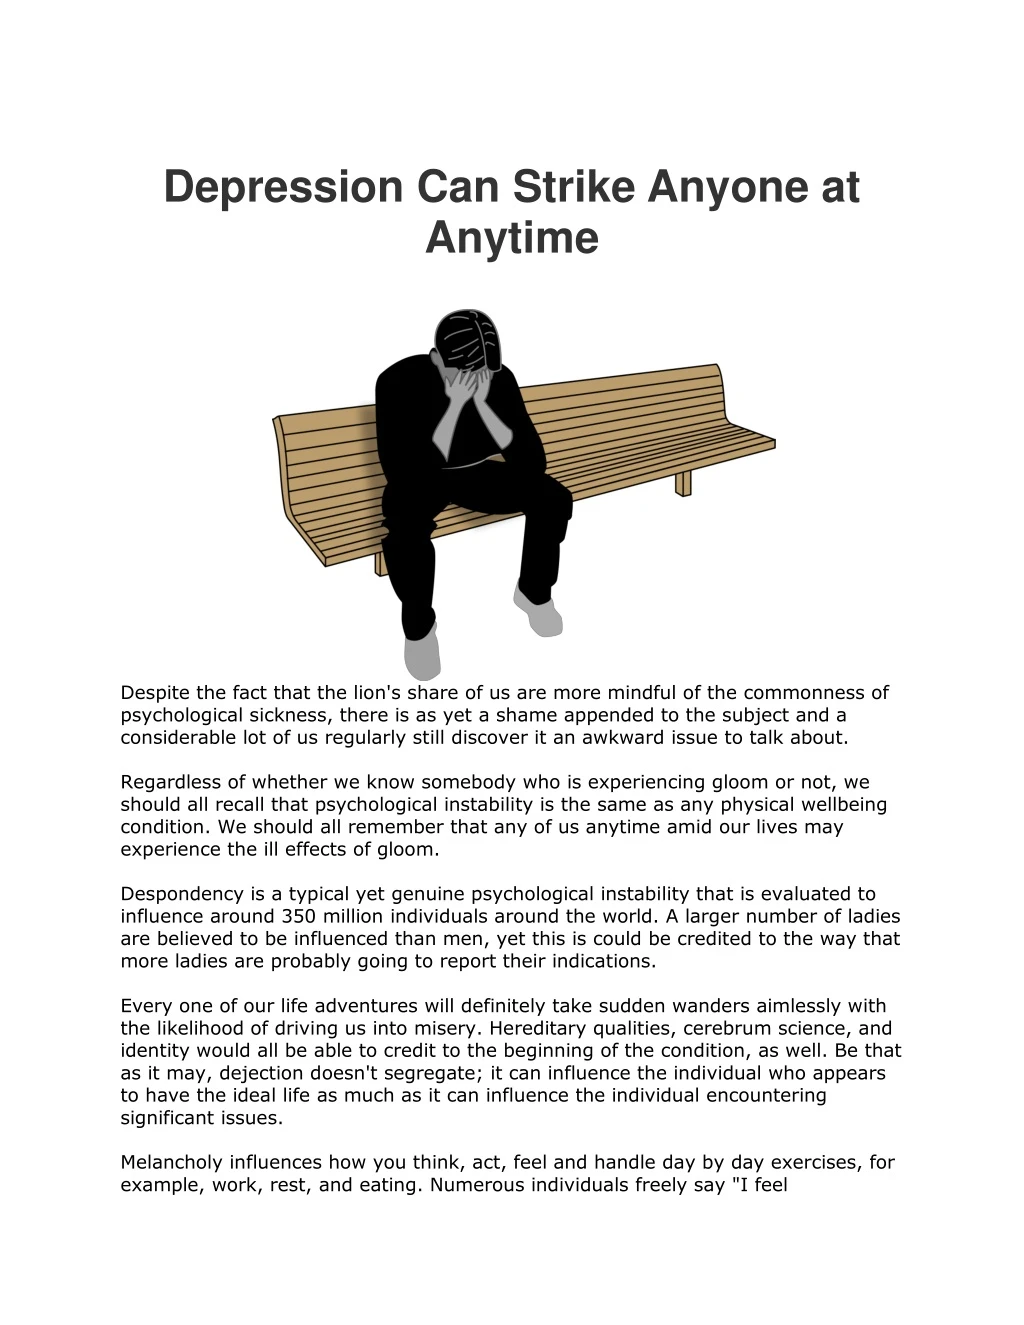 depression can strike anyone at anytime